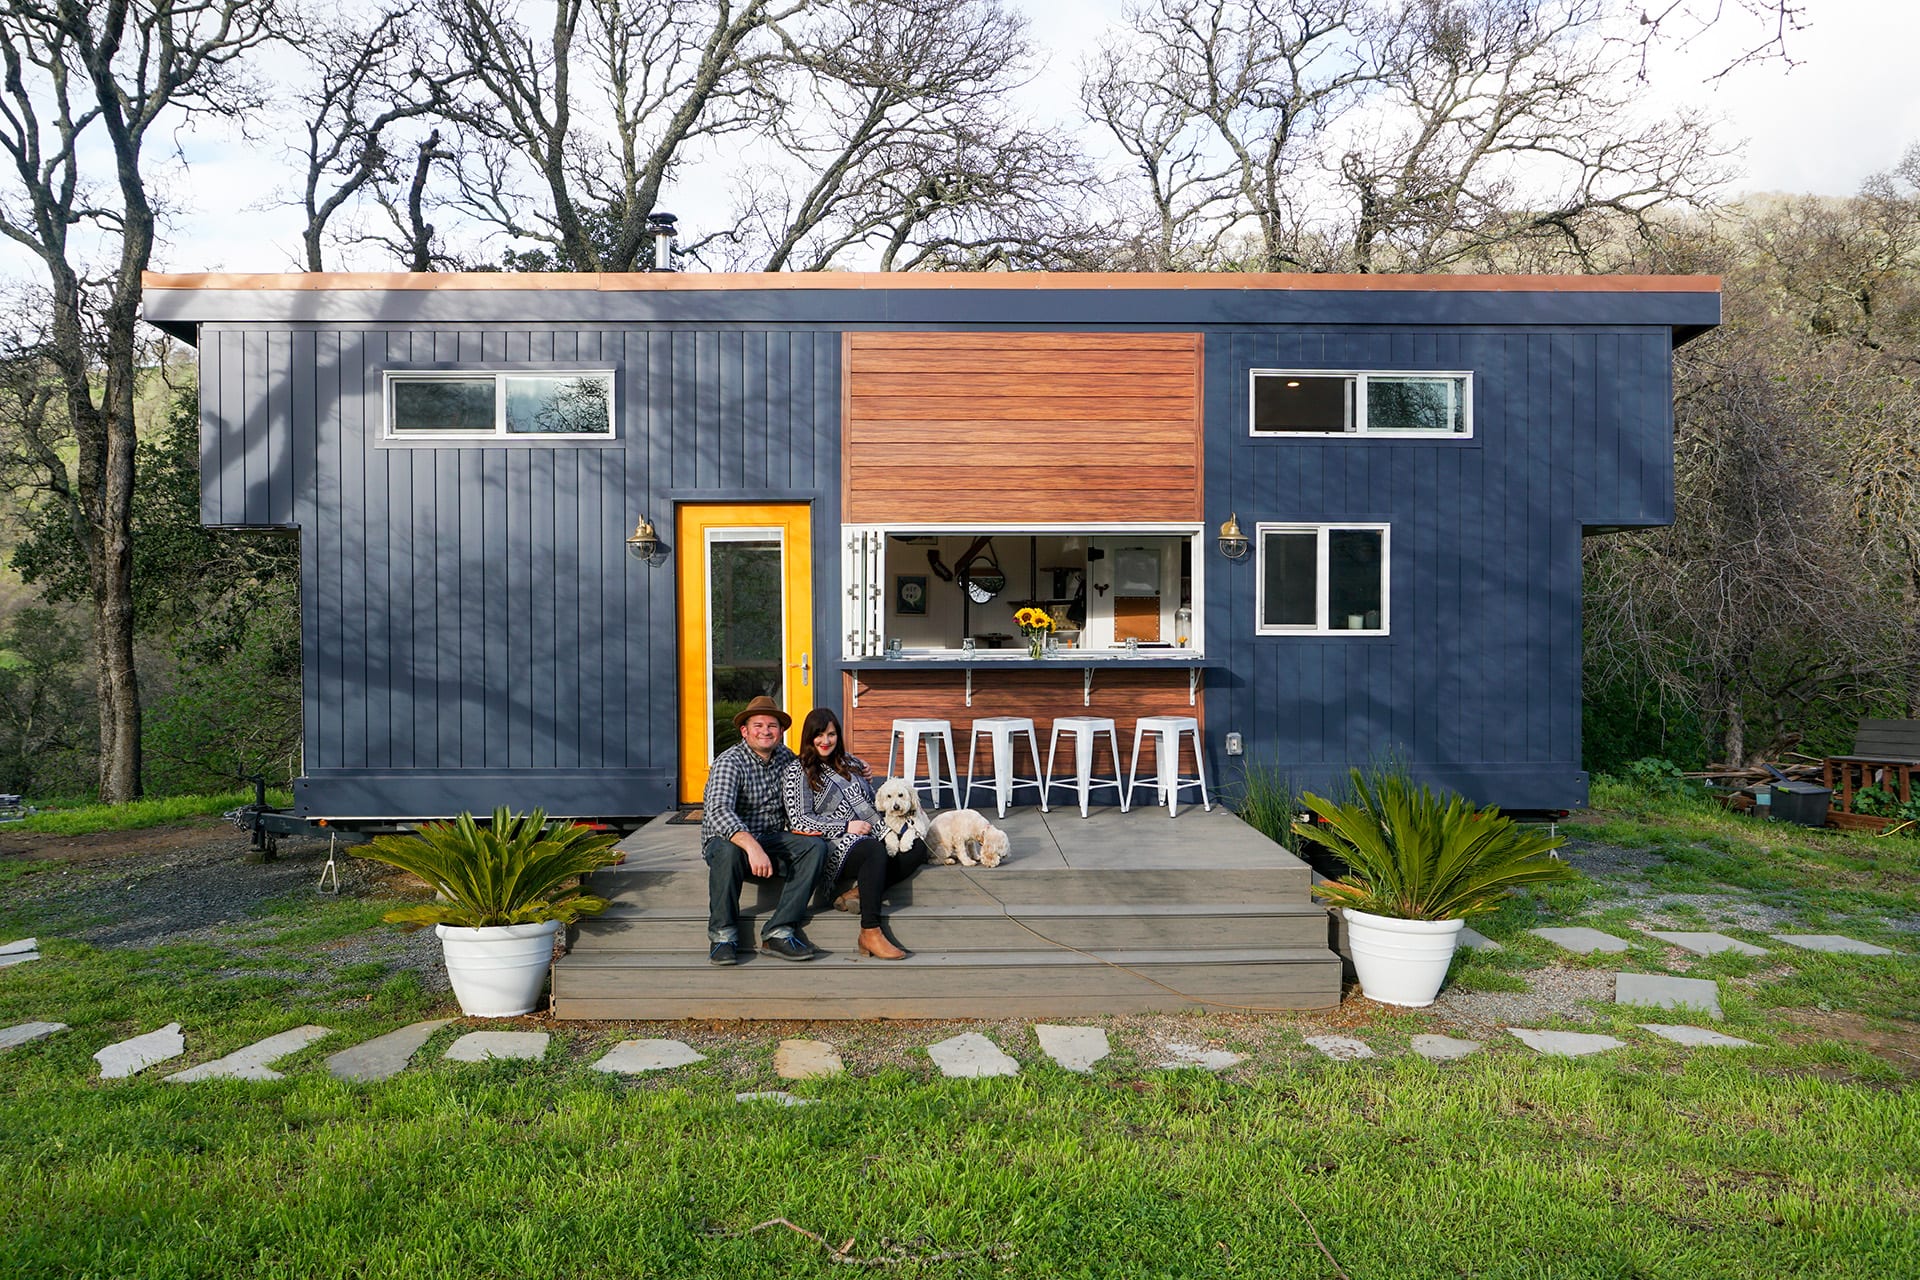 Why we remodeled the exterior of our tiny house Knotwood